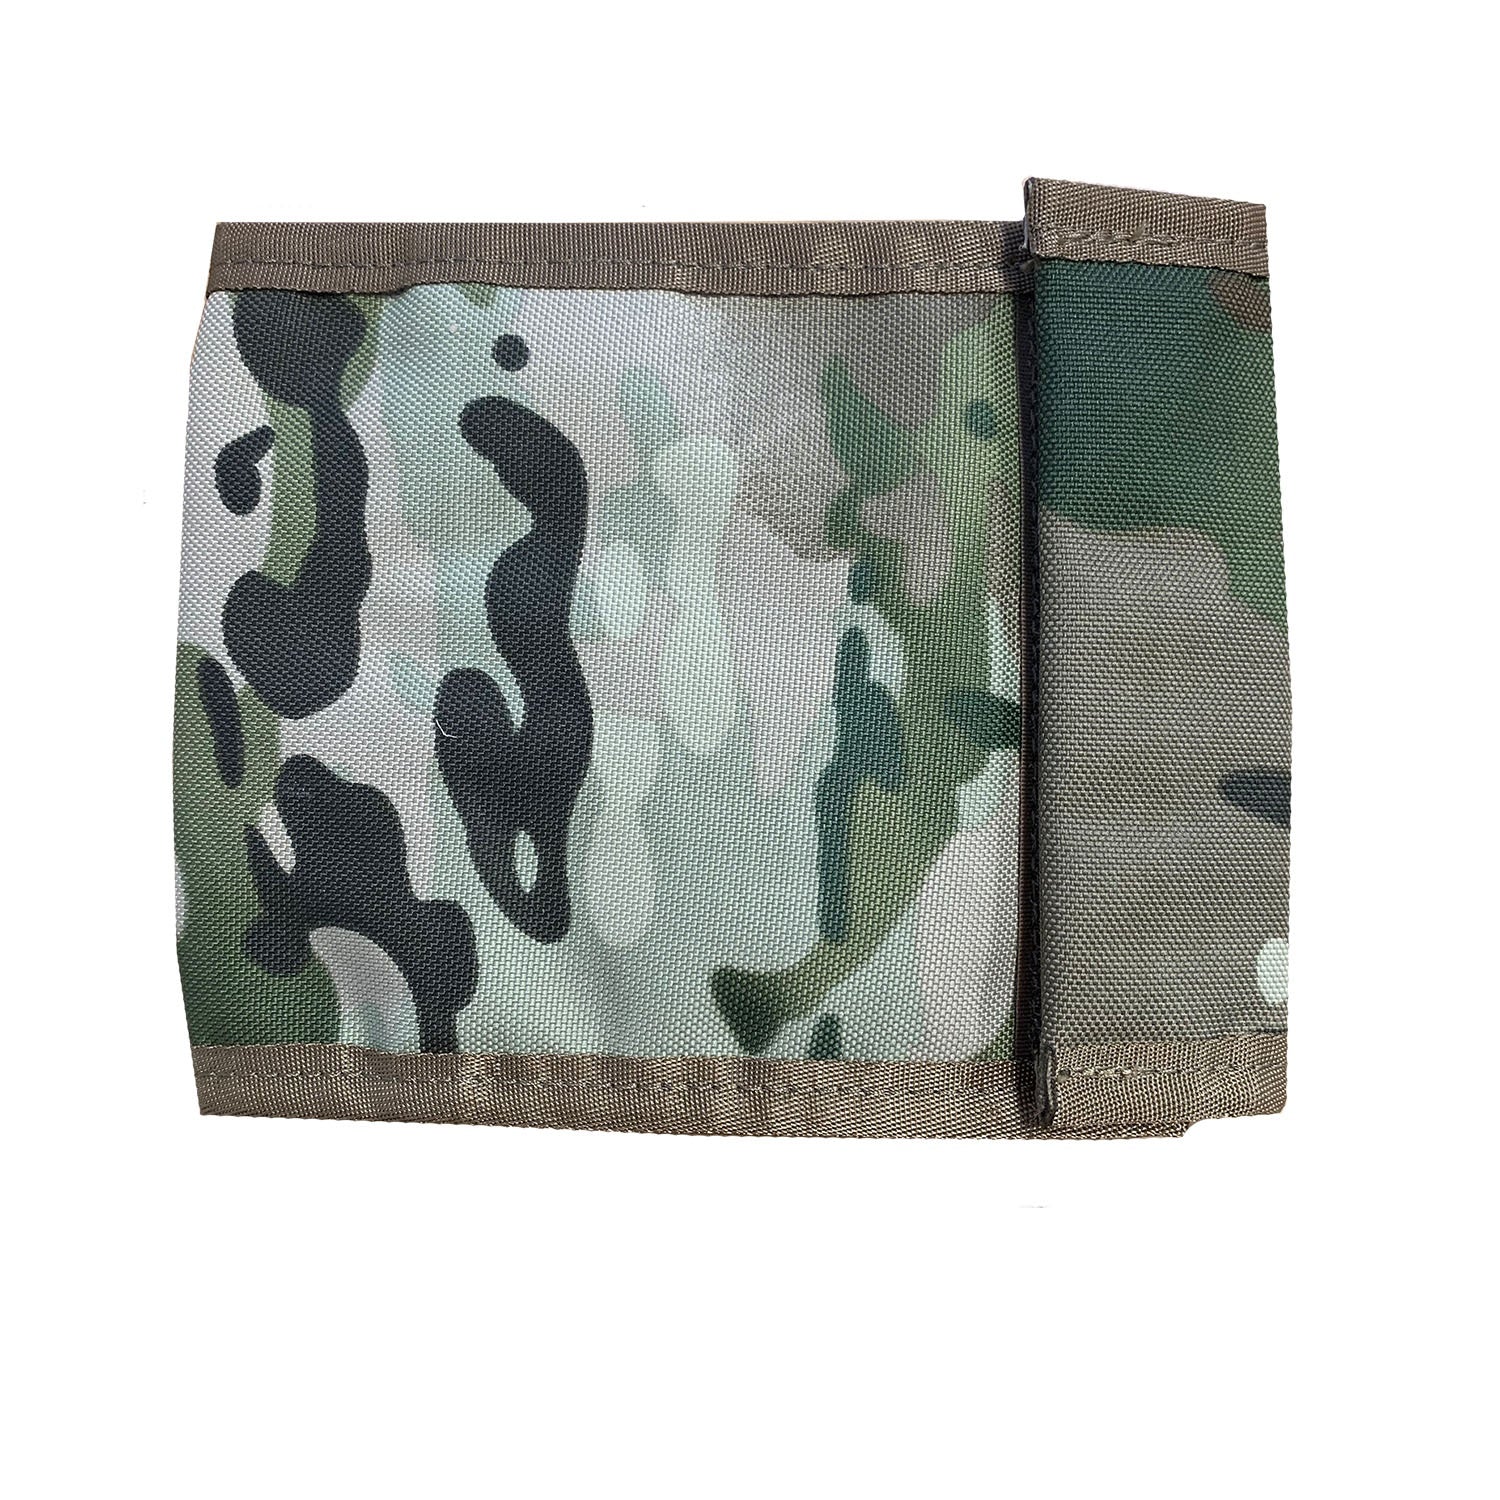 Made from heavy duty 900D fabric with dual coat waterproofing, this standard military issue sized wallet is a tough cookie  It is compatible with both the 20 & 40 page viewee Twoee and features a velcro closure with slots for pens and pencils  Great for military use, scouts, cadets, hikers or even for fishing and hunting documents as you can keep all your maps, guides, pens and pencils together